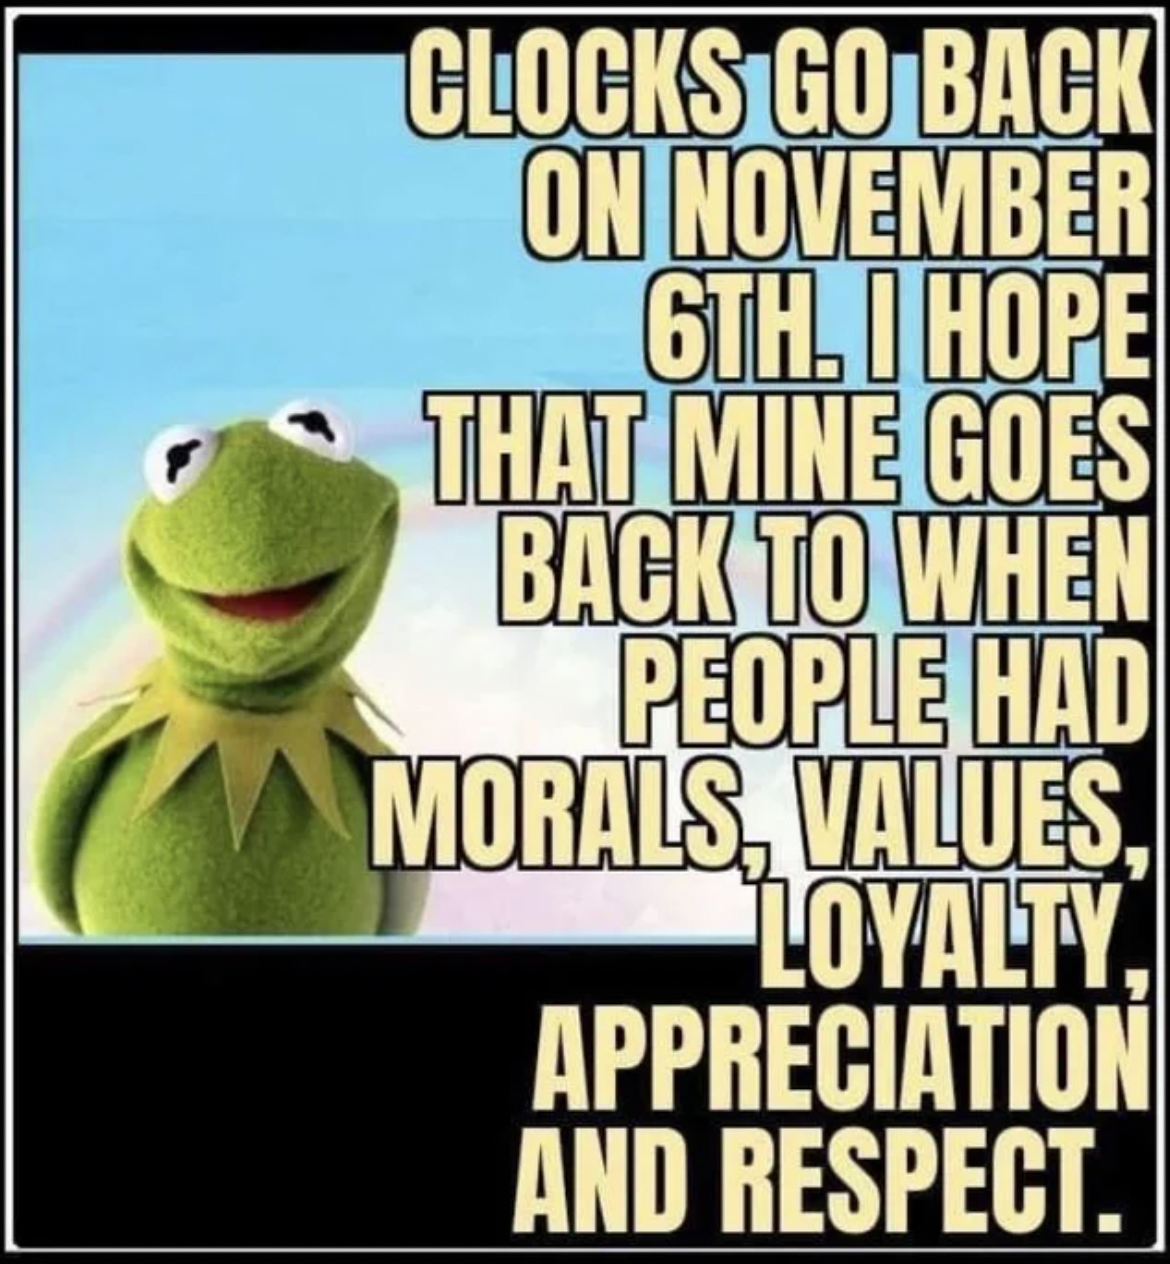 kermit the frog - Clocks Go Back On November 6TH. I Hope That Mine Goes Back To When People Had Morals, Values, Loyalty. Appreciation And Respect.